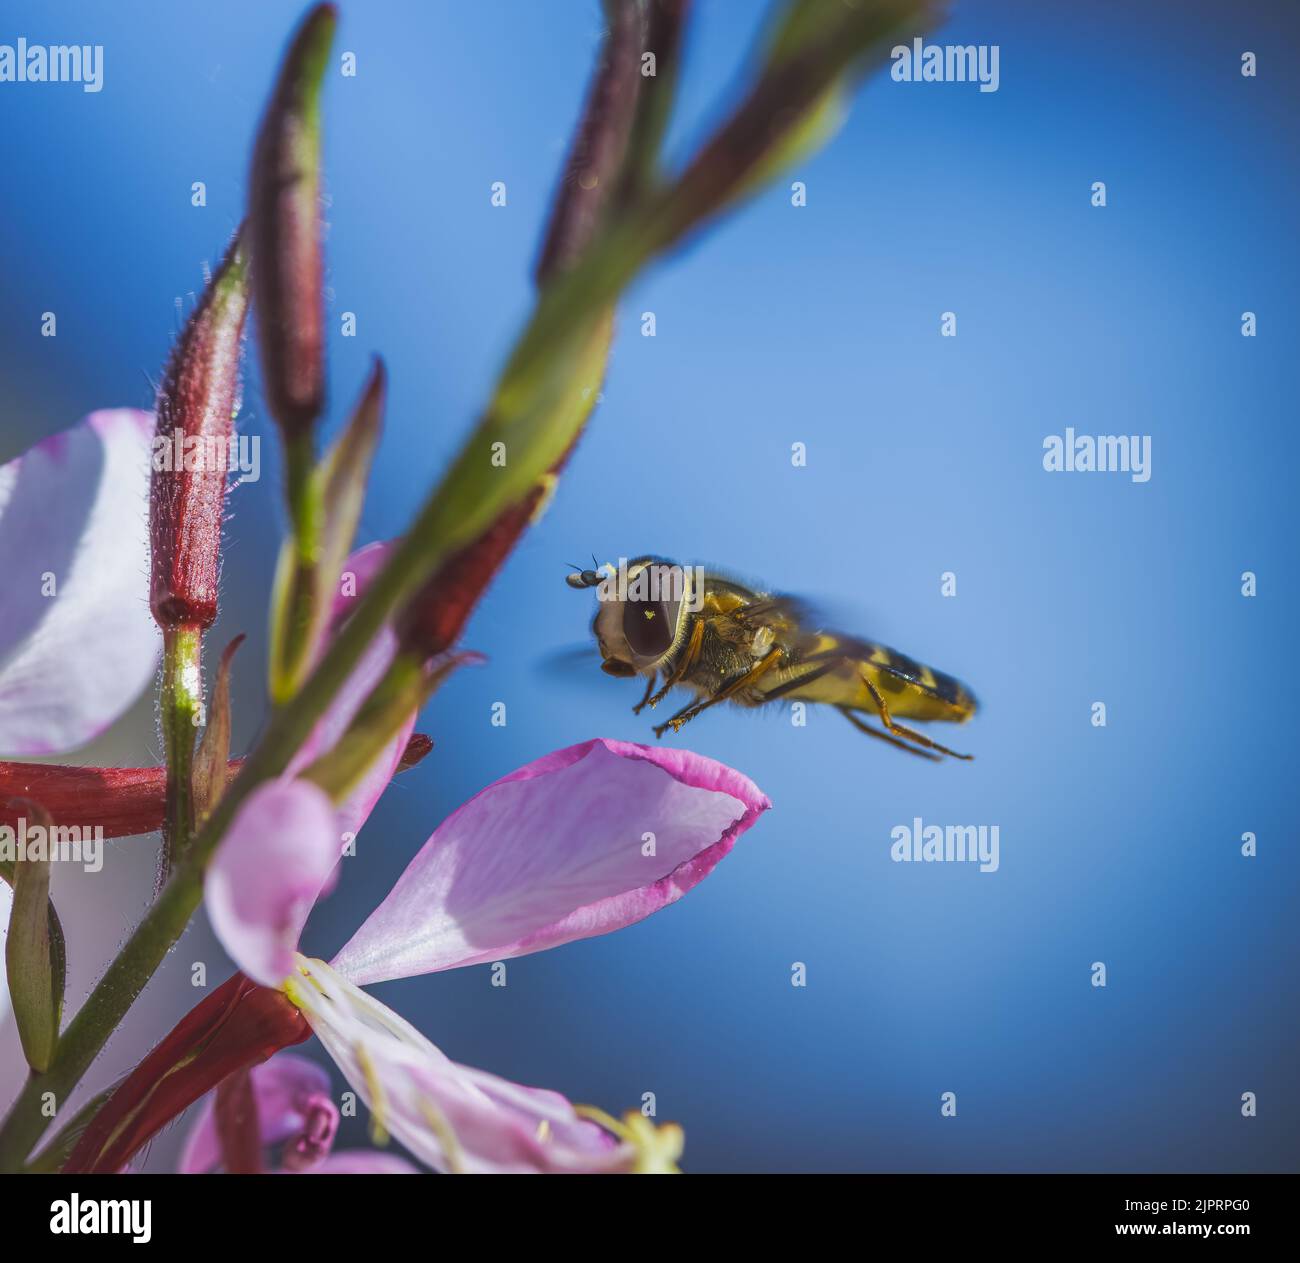 Macro of an hoverfly flying to an indian feather flower blossom Stock Photo